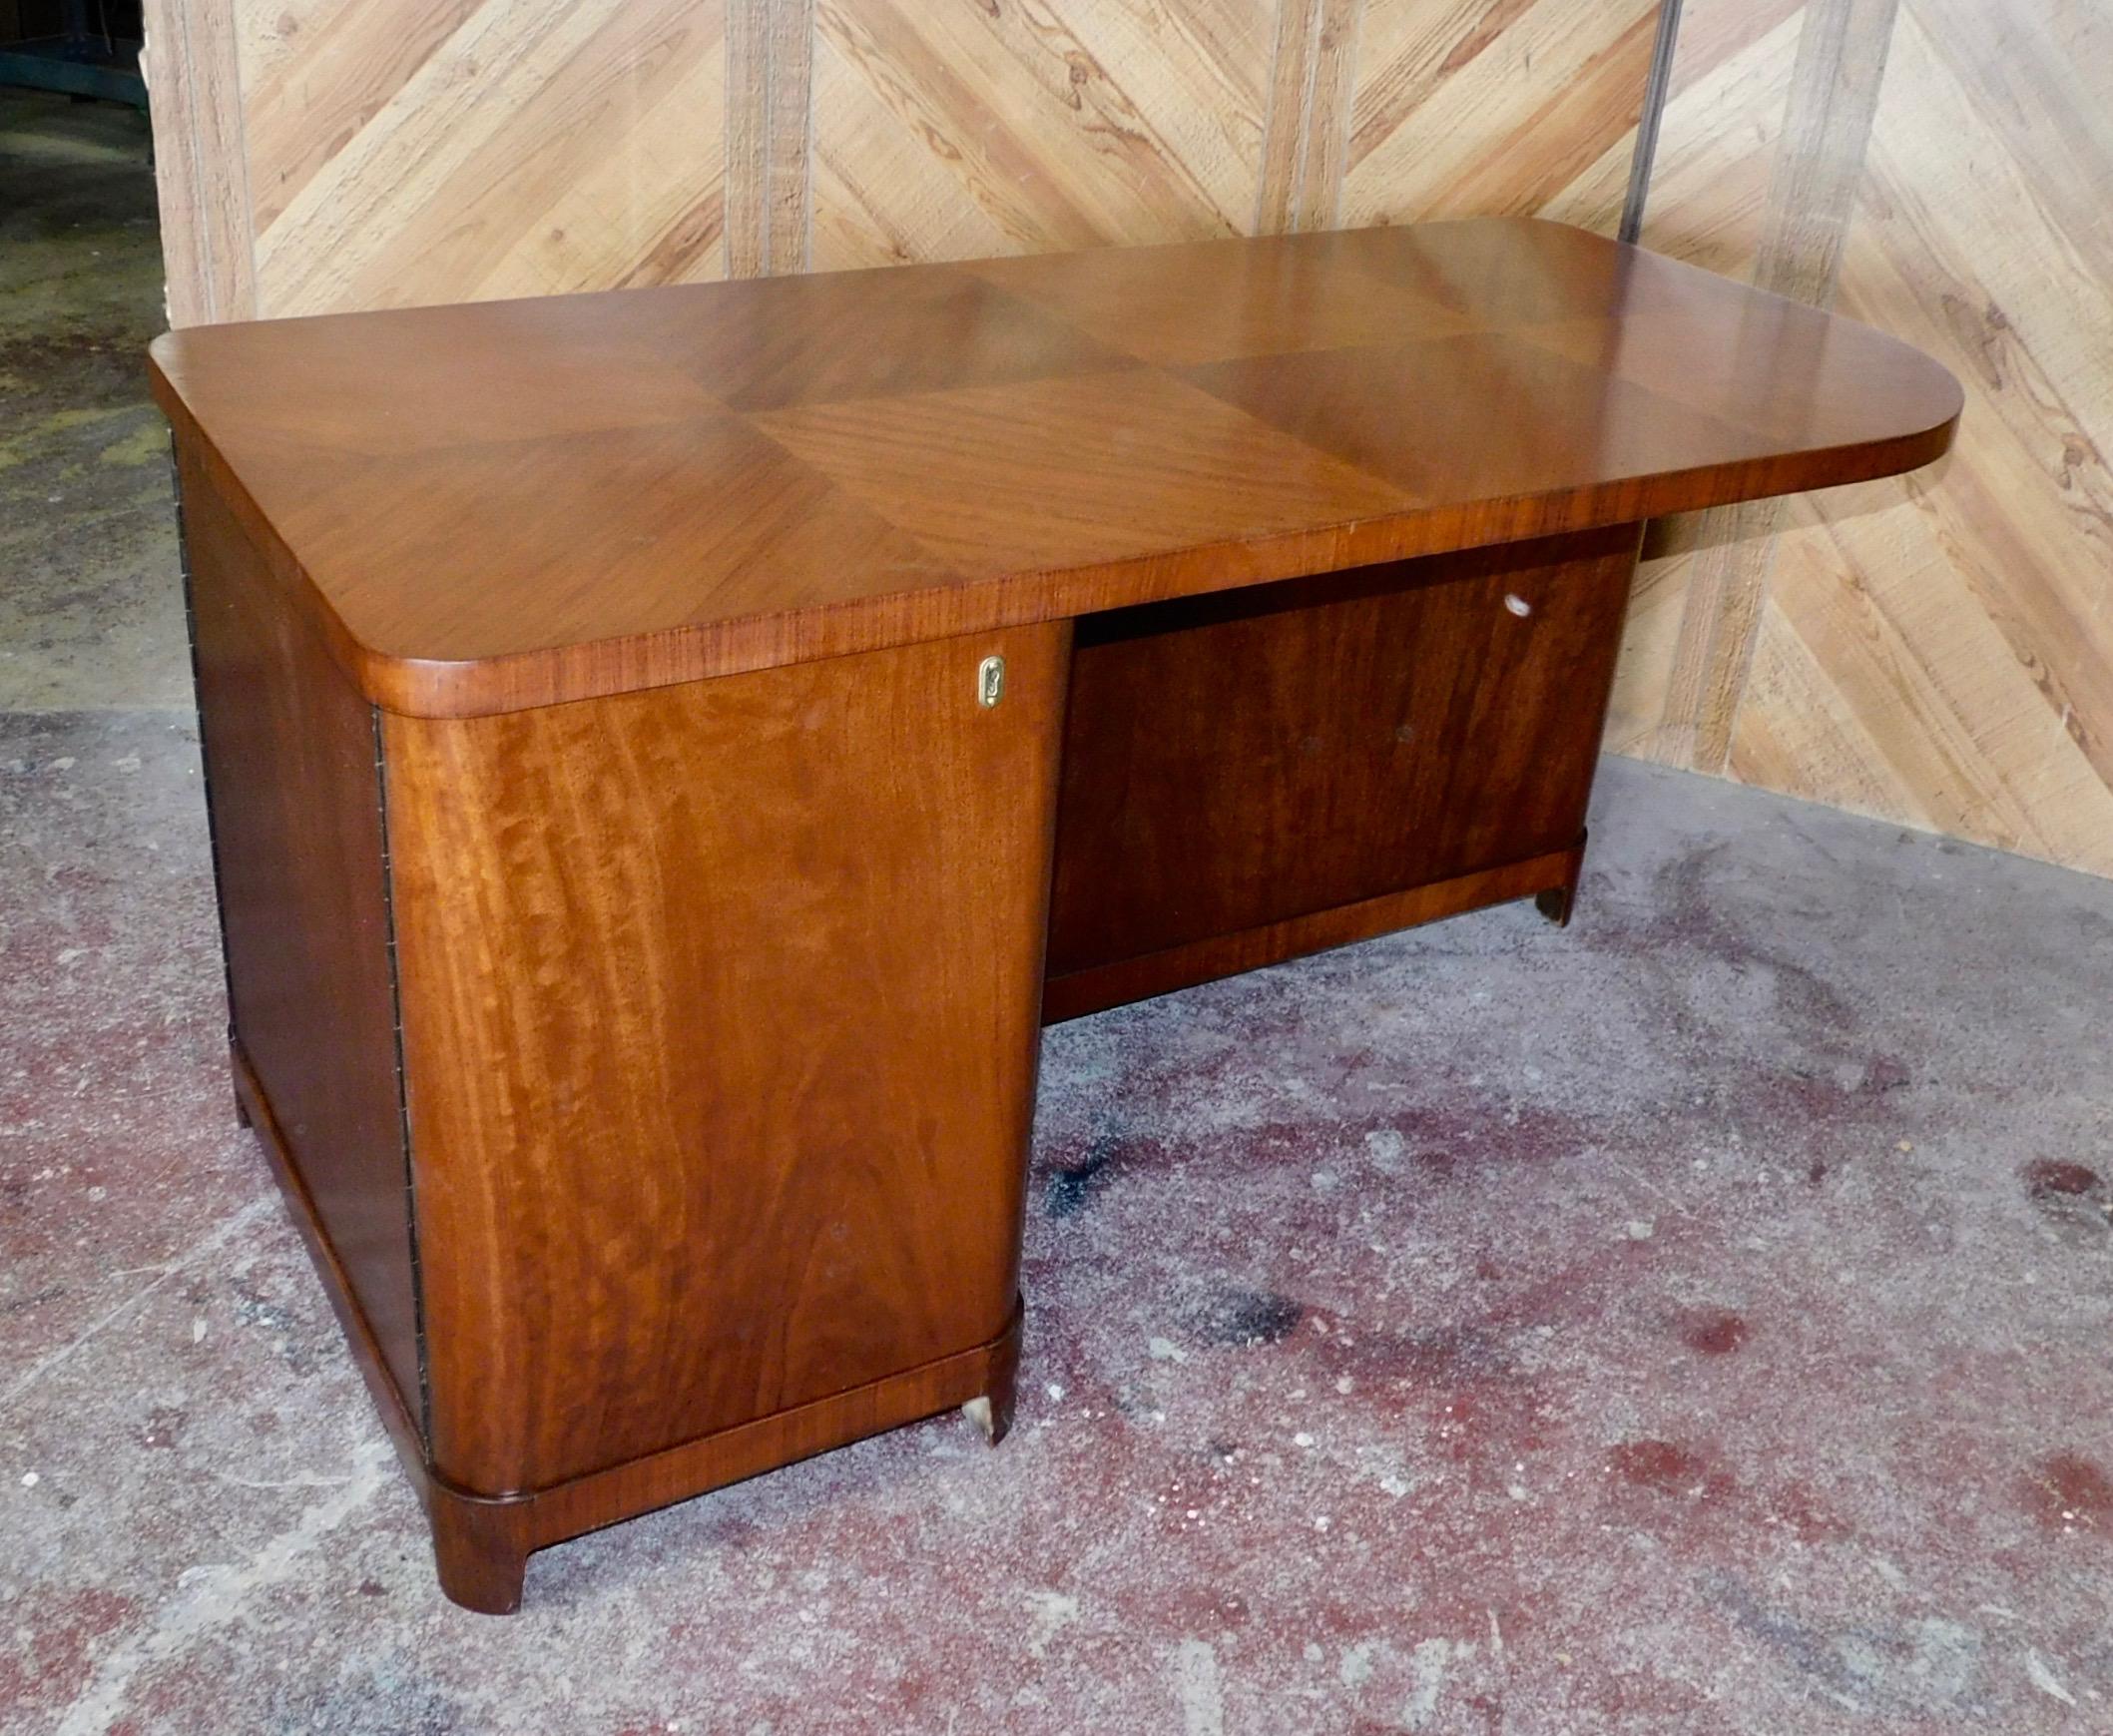 Swedish Art Moderne Desk in Flame Mahogany with Built-In Bookcase, circa 1940 In Good Condition For Sale In Richmond, VA